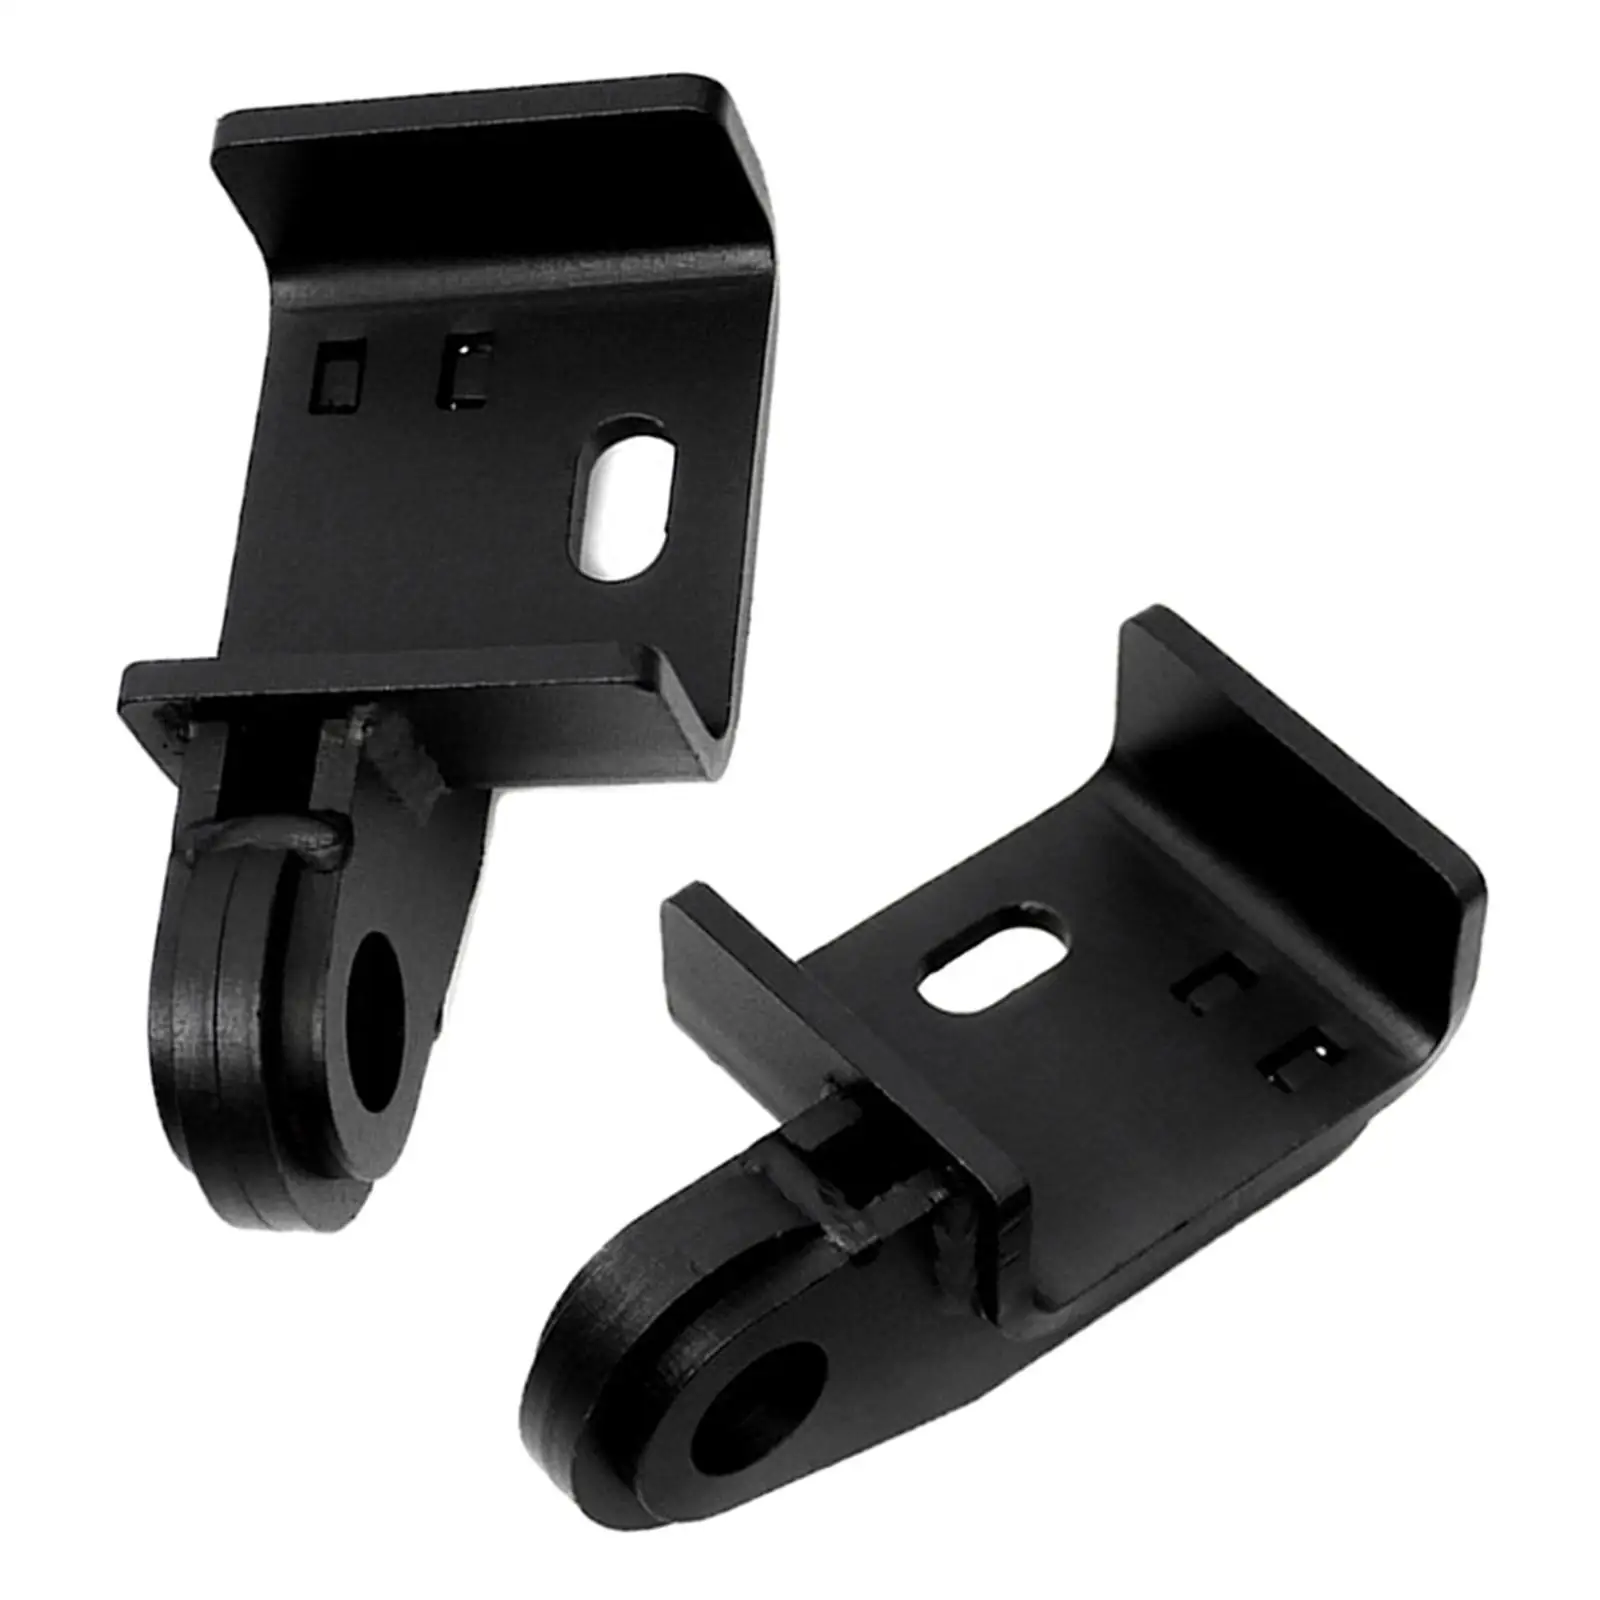 2x Auto Front Tow Hook D Ring Mounting Bracket Front Bumper Tow Hook Mount Bracket Holder Shackle Bracket for Toyota 